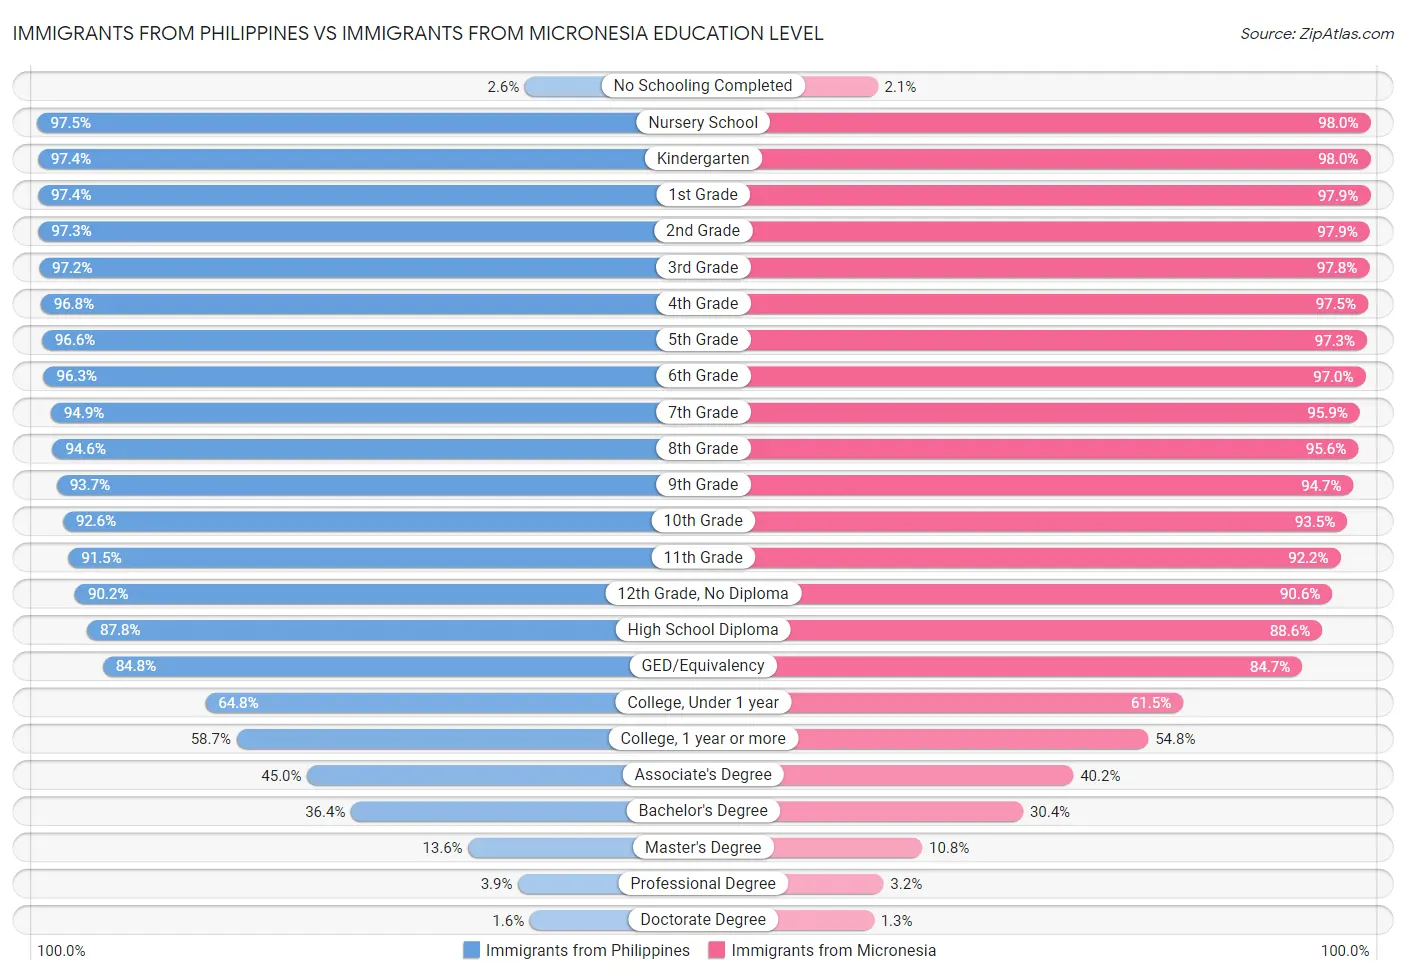 Immigrants from Philippines vs Immigrants from Micronesia Education Level